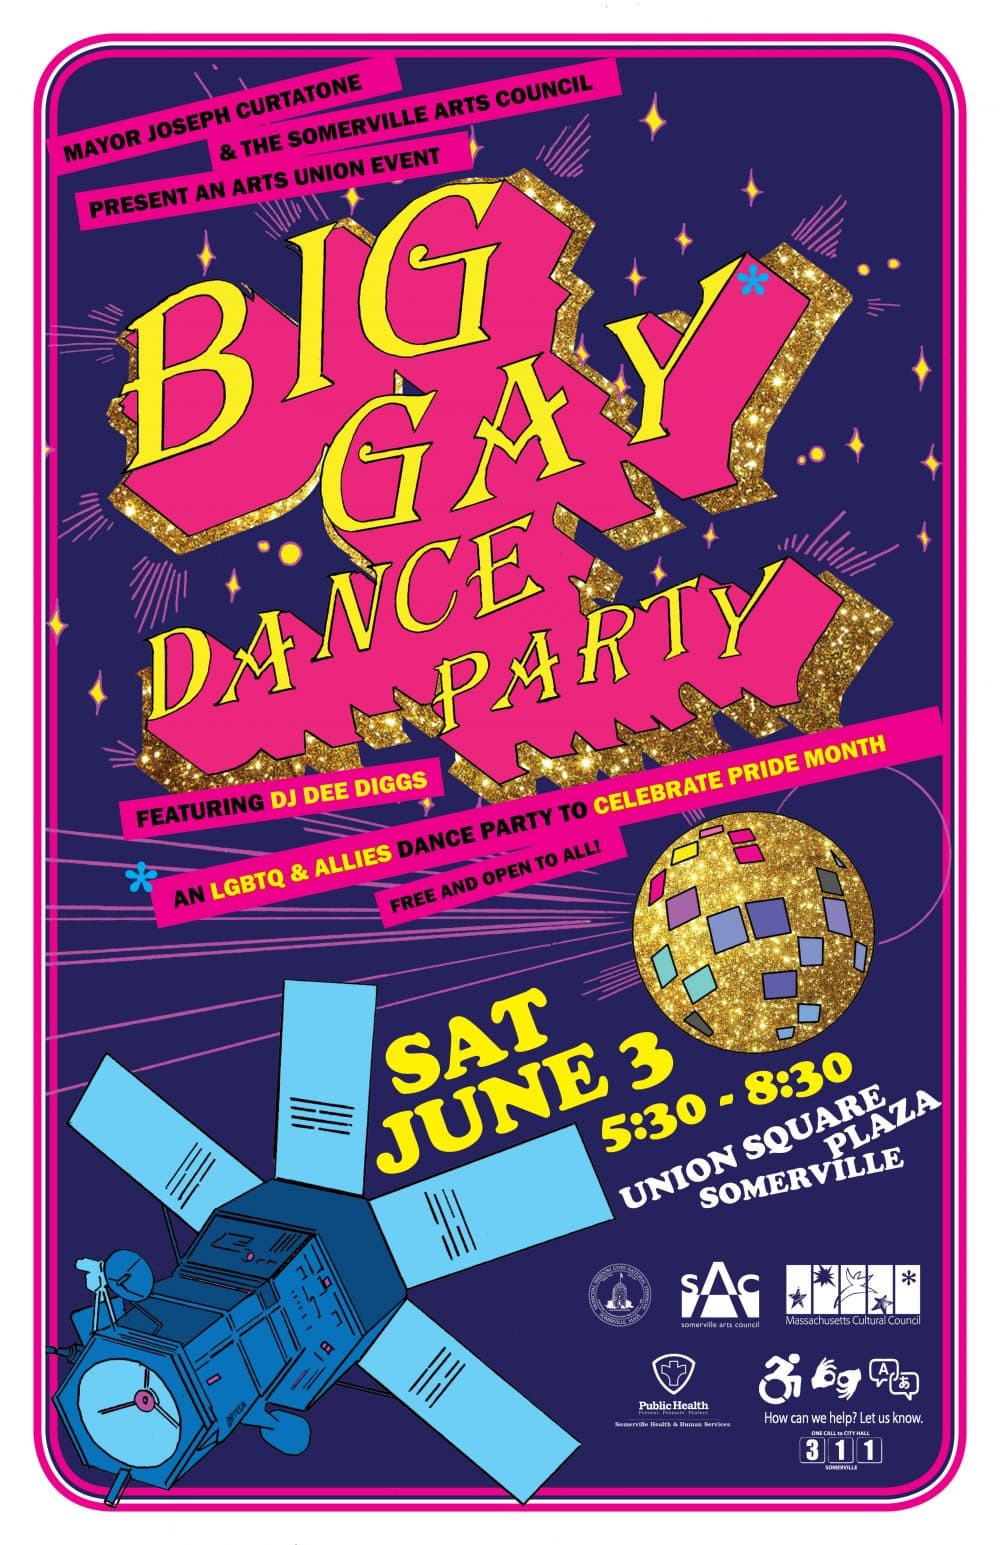 The Big Gay Dance Party's poster. (Courtesy)